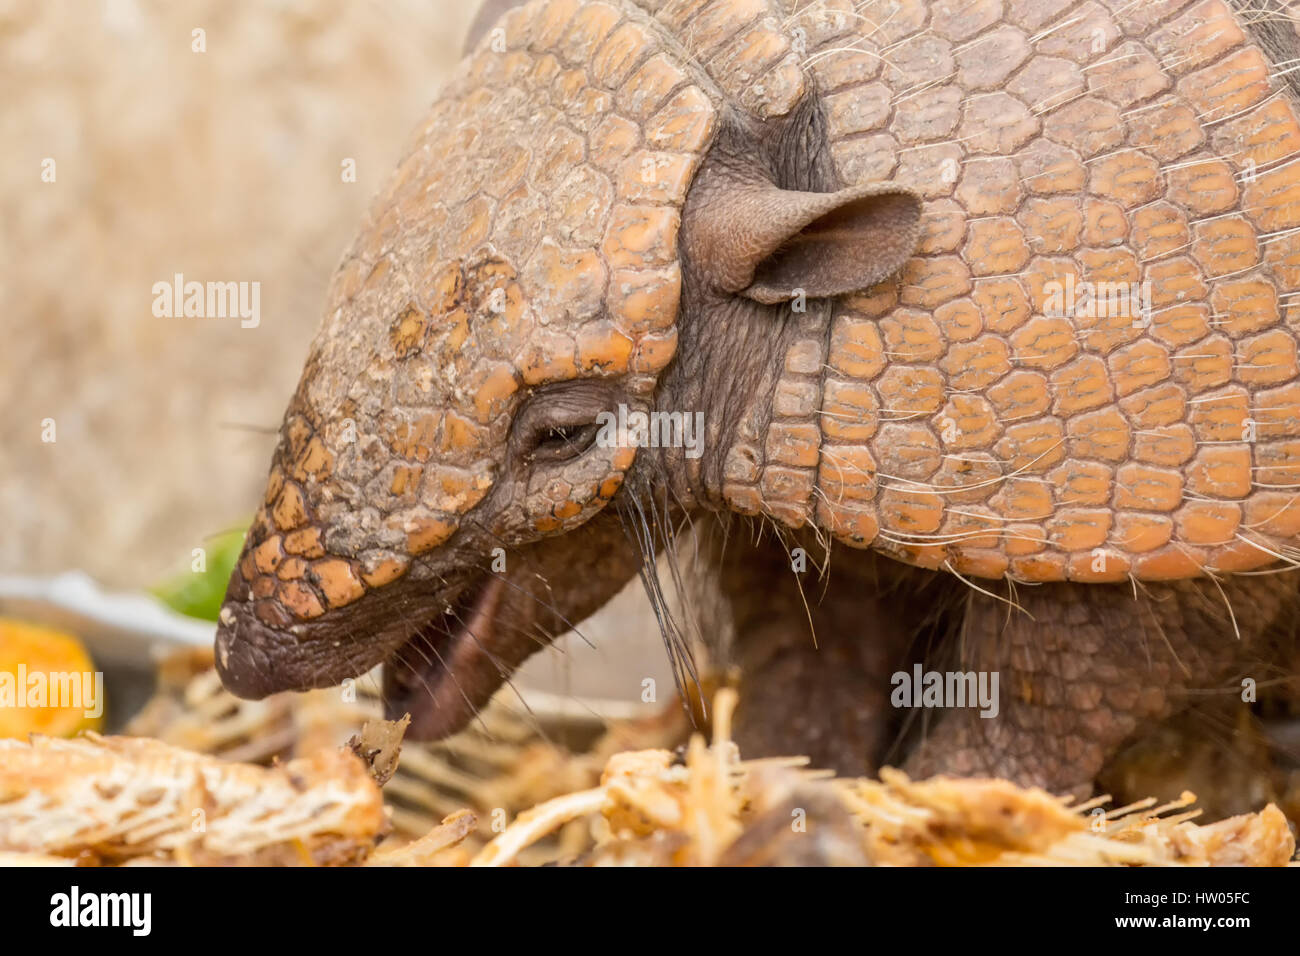 Seven-banded armadillo eating table scraps set out for it in the Pantanal region, Mato Grosso, Brazil, South America Stock Photo